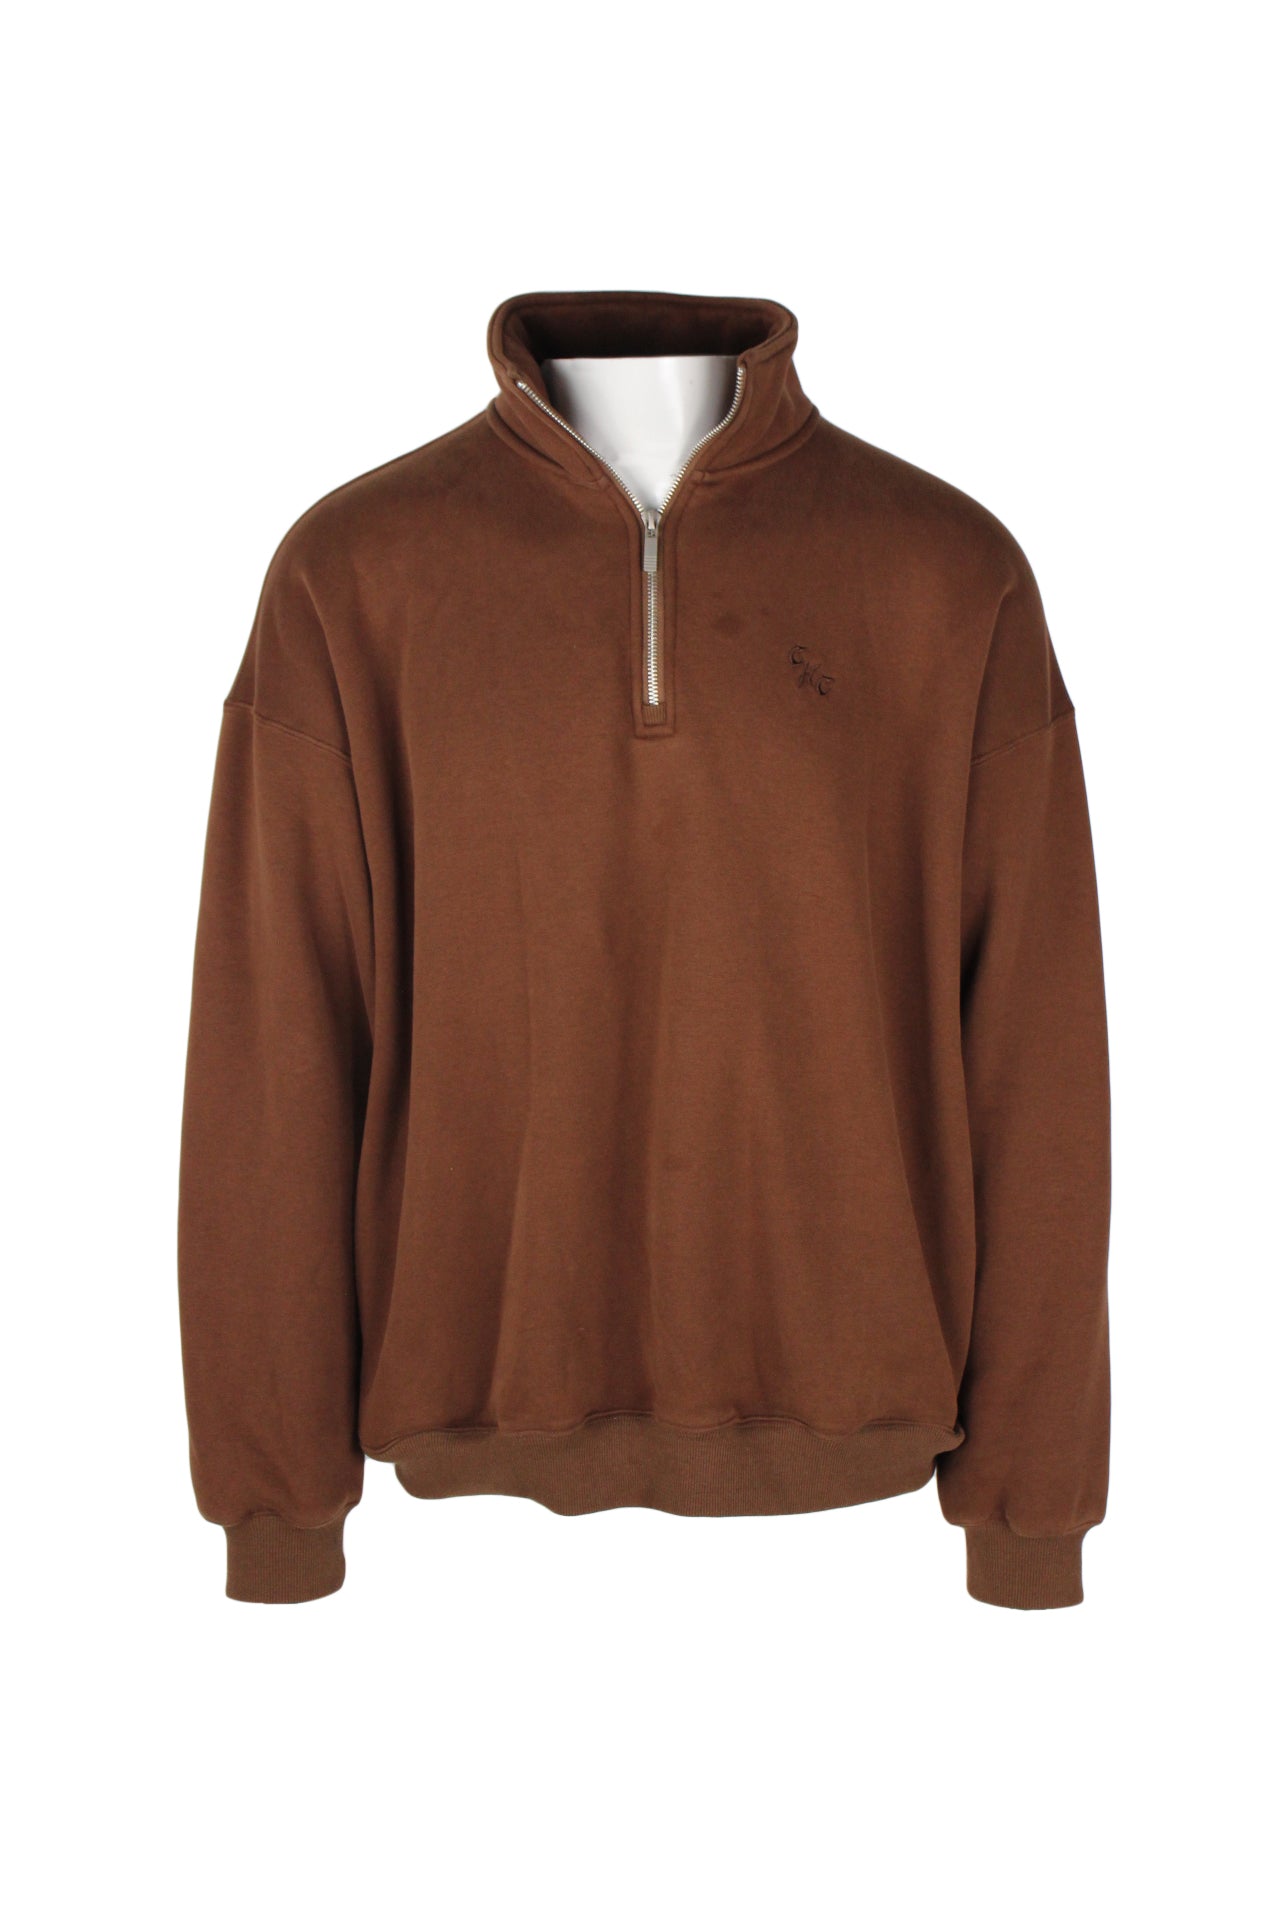 front view of cash hooked cloth brown pullover sweatshirt. features ‘chc’ logo embroidered at left breast, zip placket, side hand pockets, and ribbed cuffs/hem.